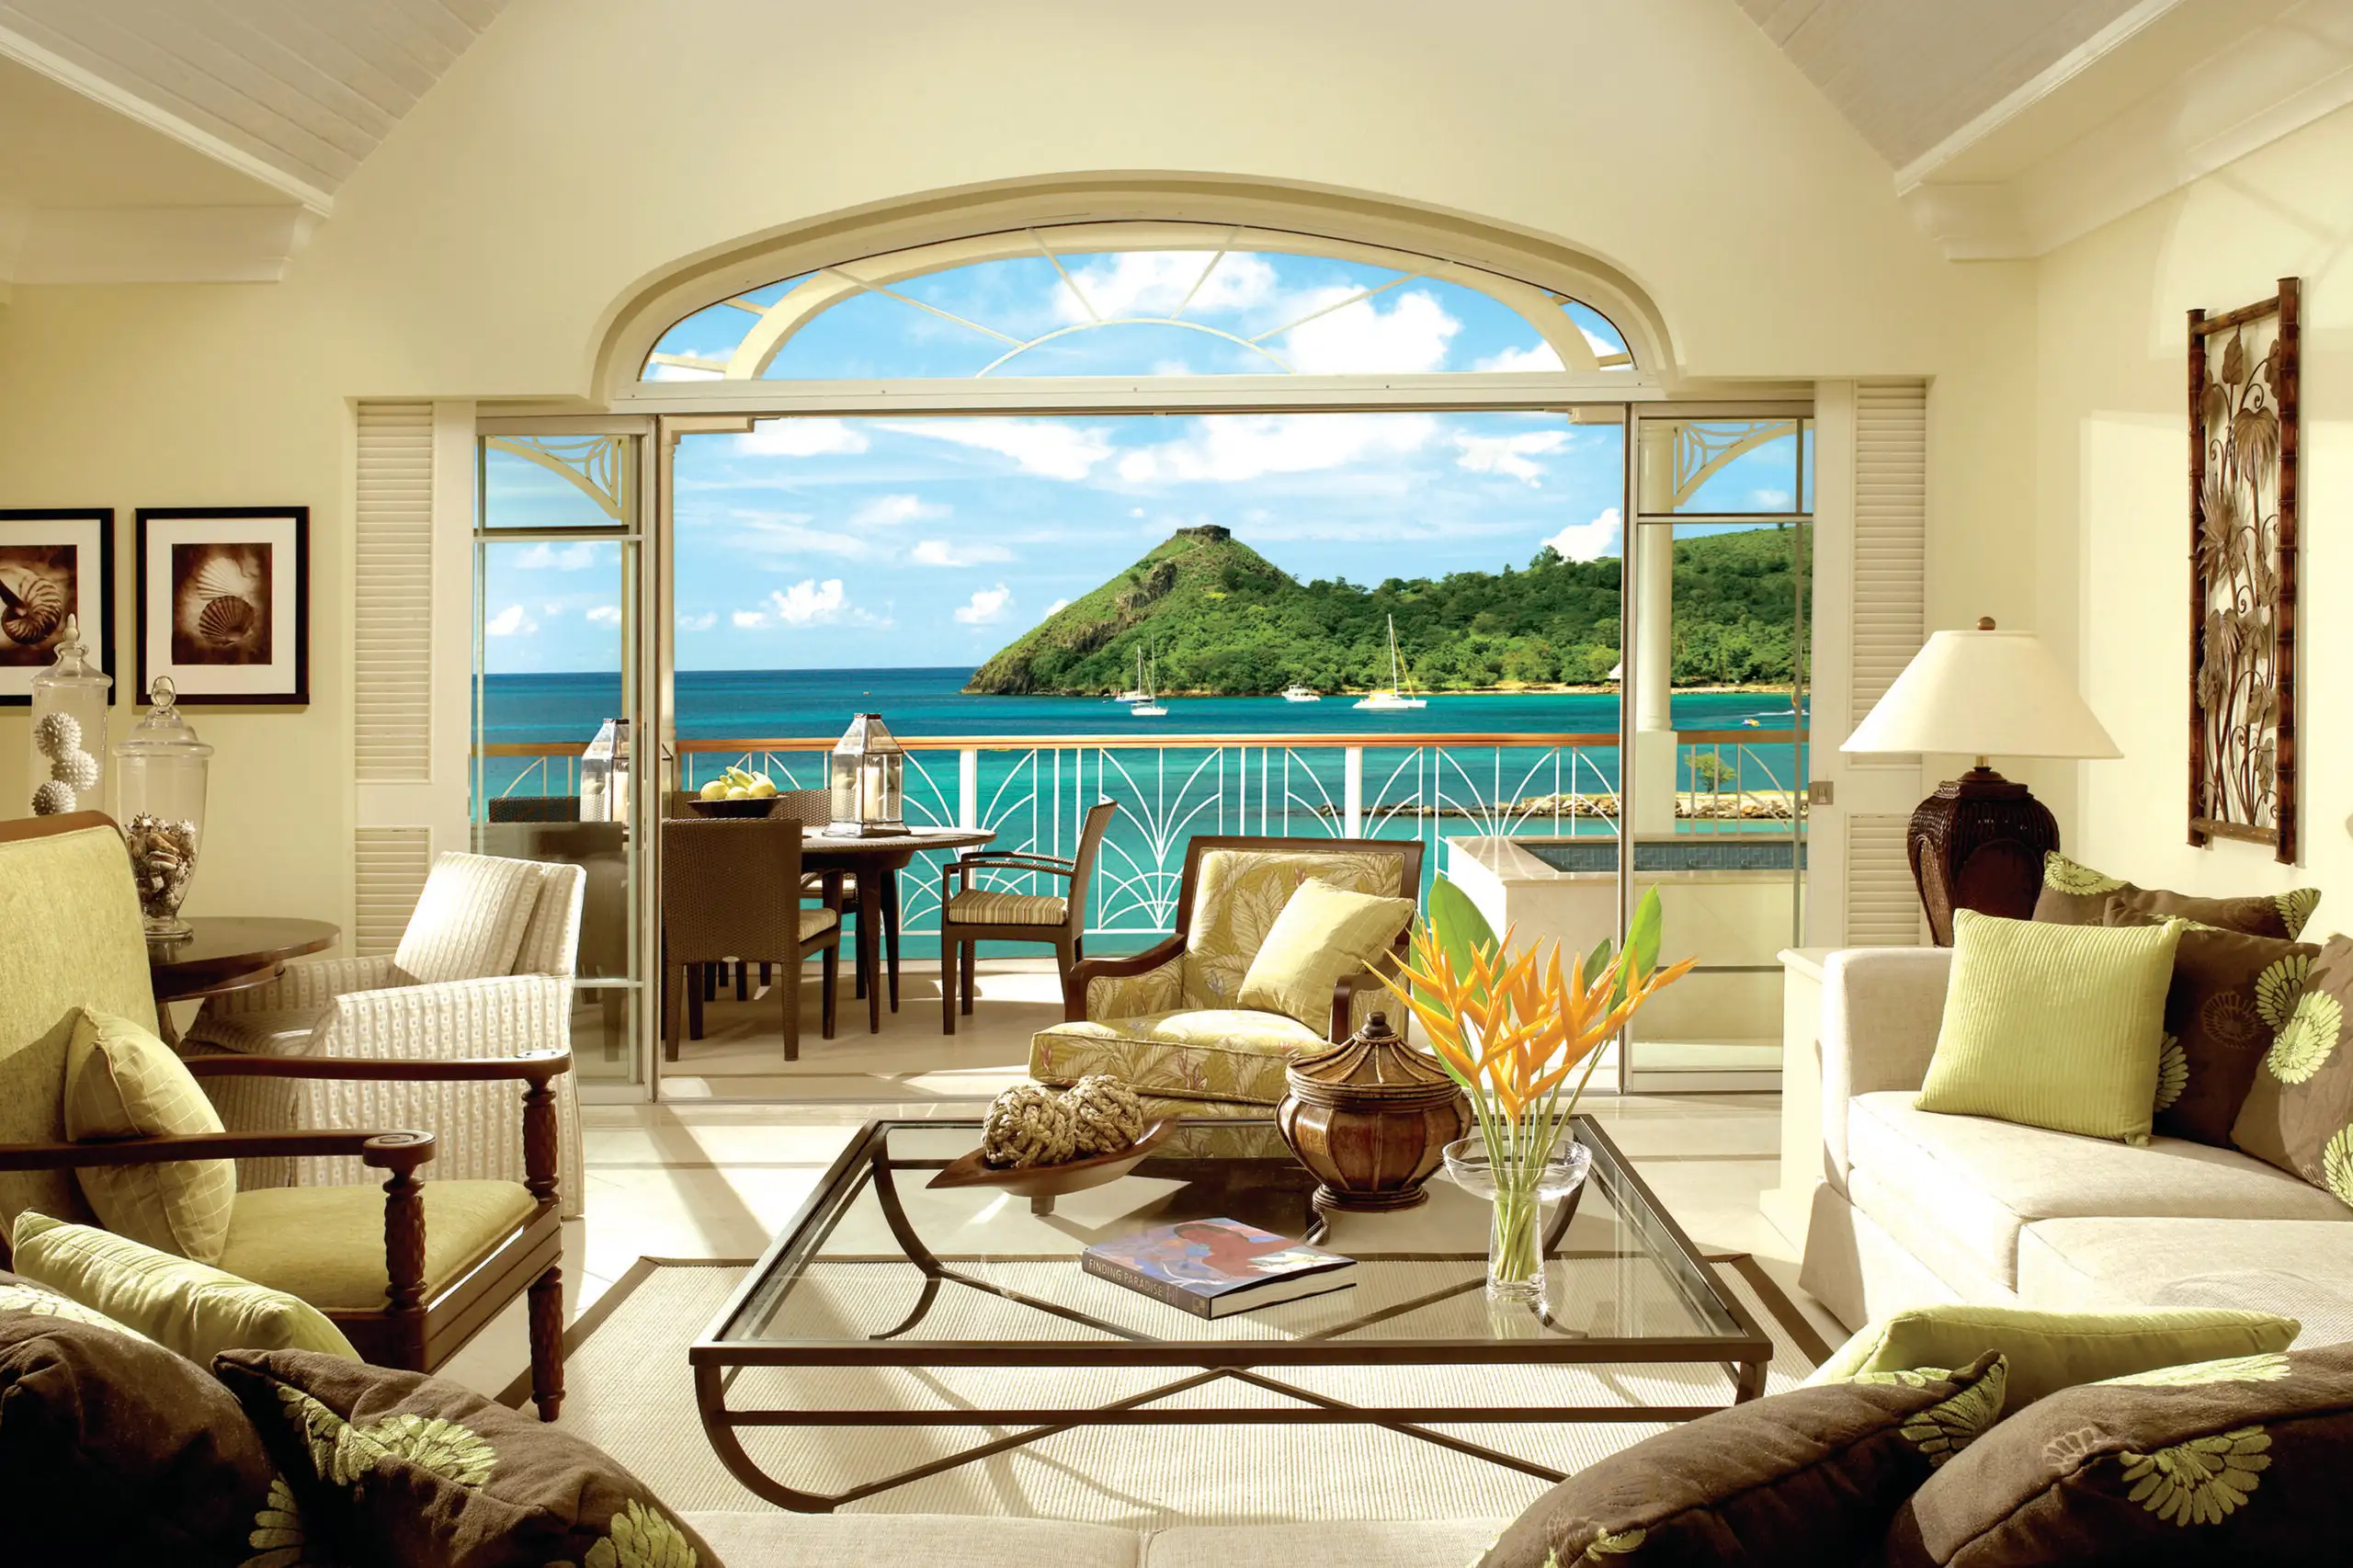 Living area of a suite at The Landings Saint Lucia, with large balcony doors open to the ocean view